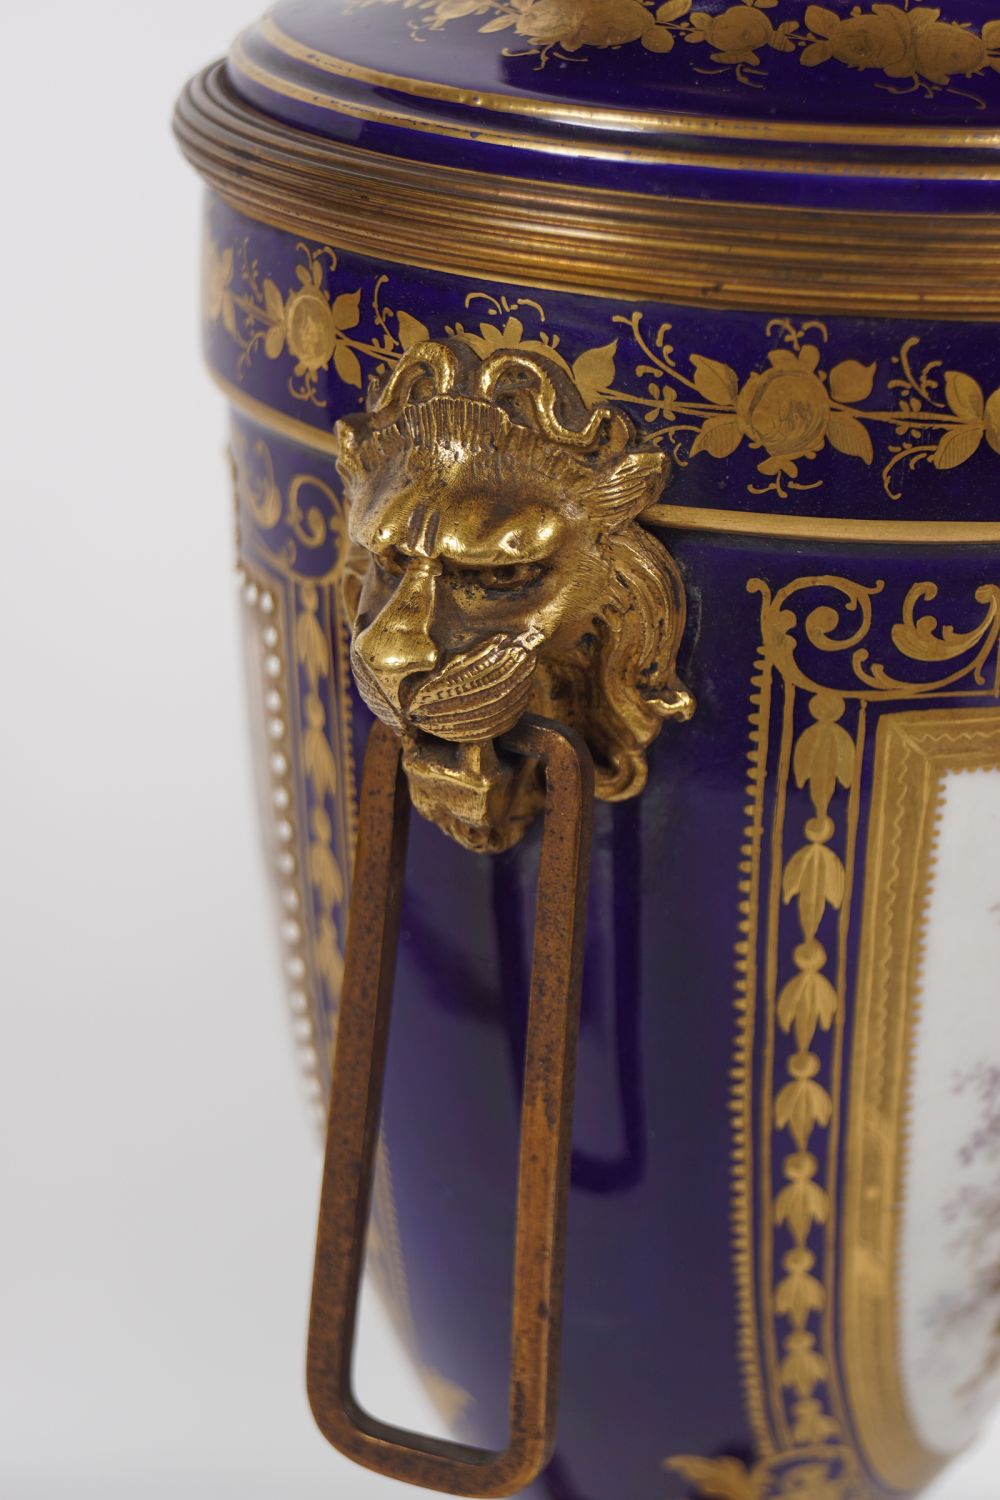 PAIR OF 19TH-CENTURY SÈVRES CANDLE URNS - Image 7 of 8